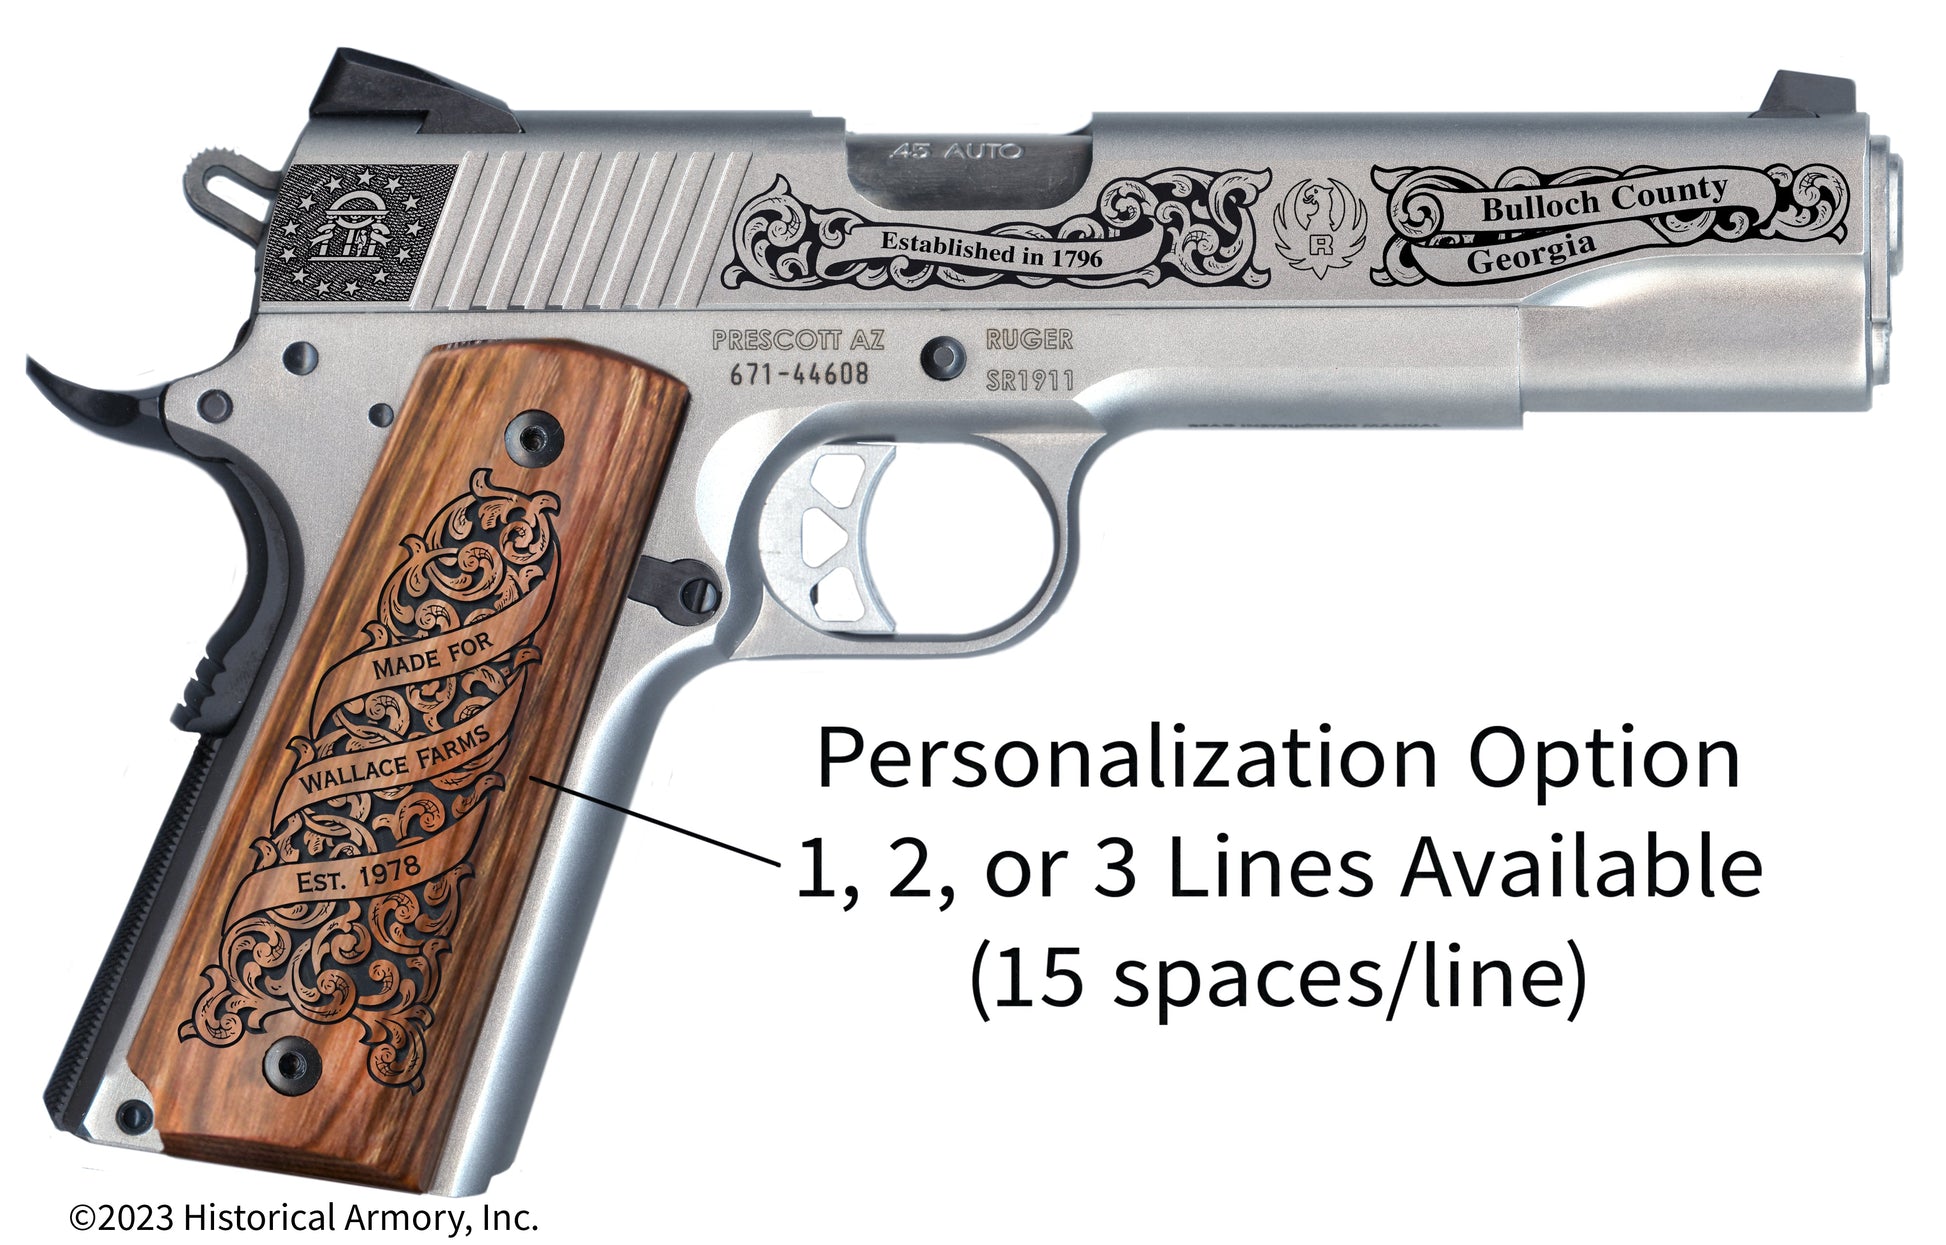 Bulloch County Georgia Personalized Engraved .45 Auto Ruger 1911